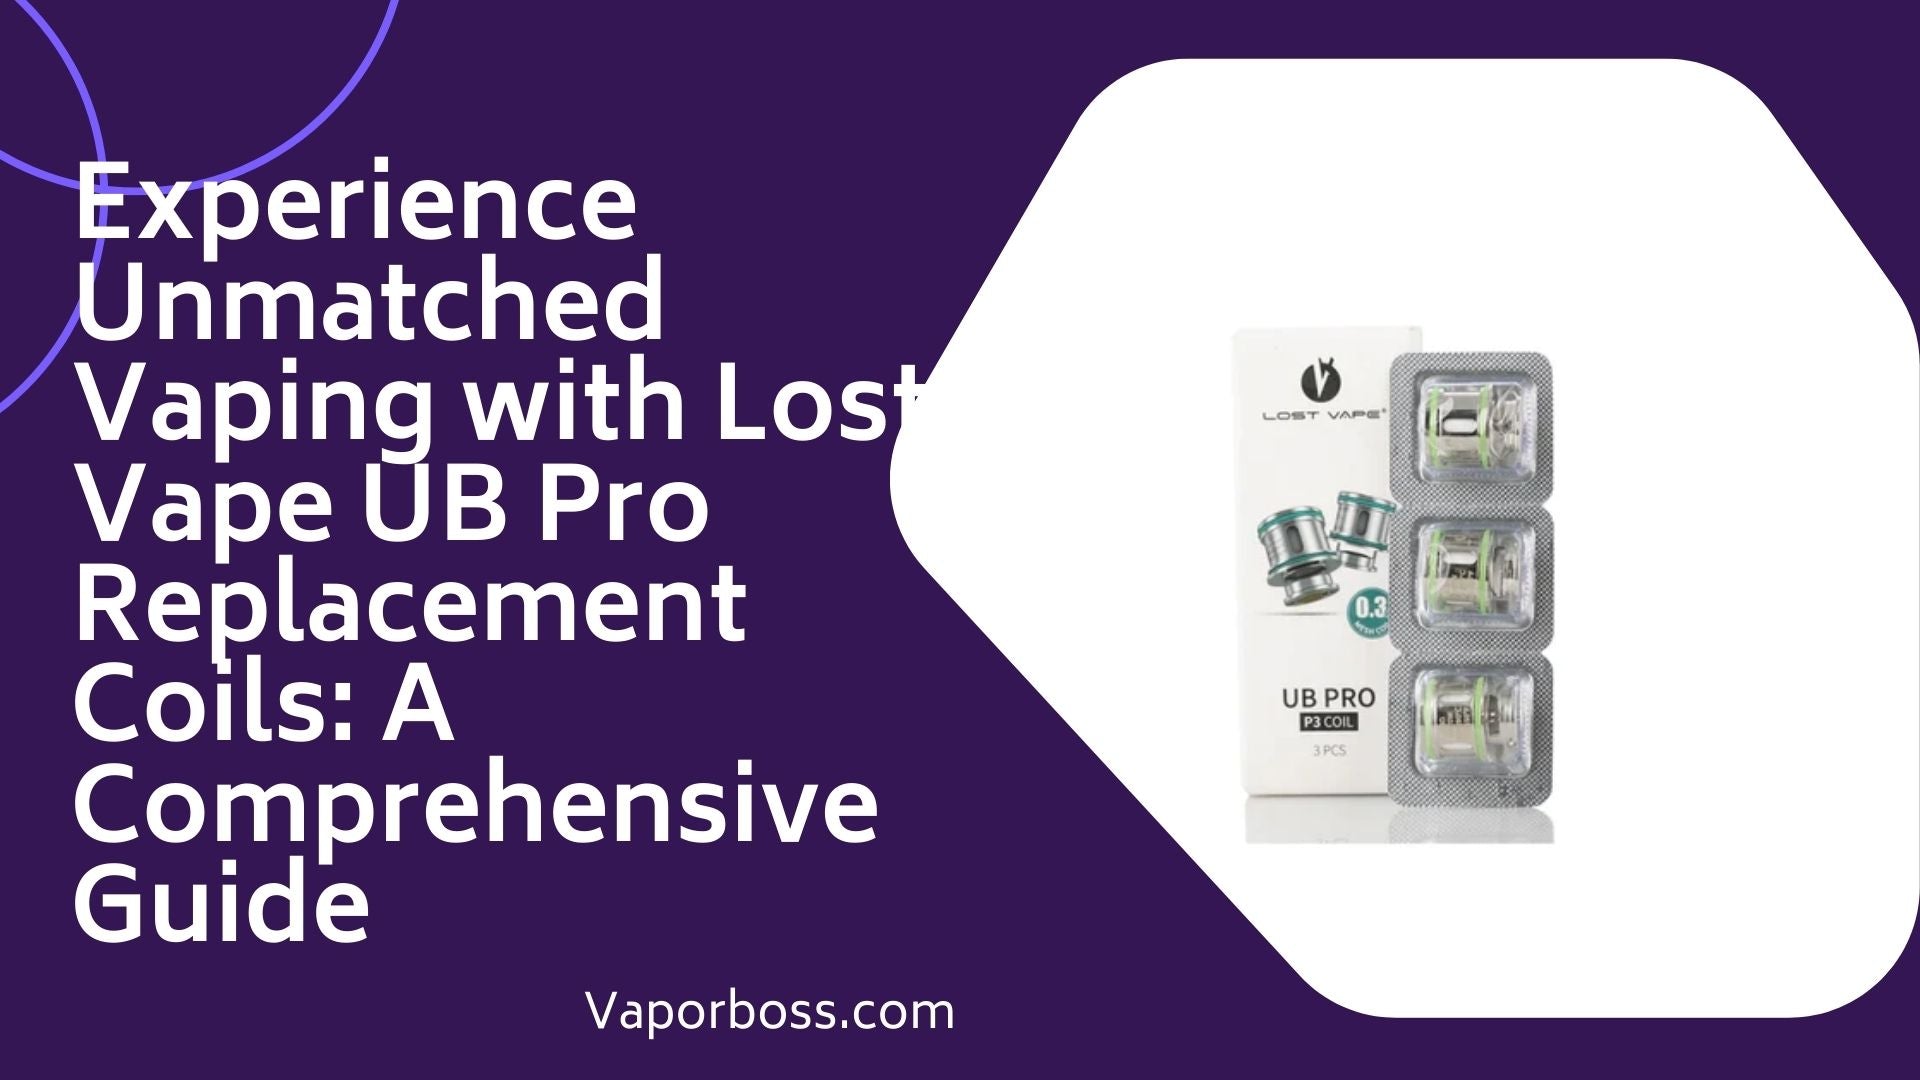 Experience Unmatched Vaping with Lost Vape UB Pro Replacement Coils: A Comprehensive Guide